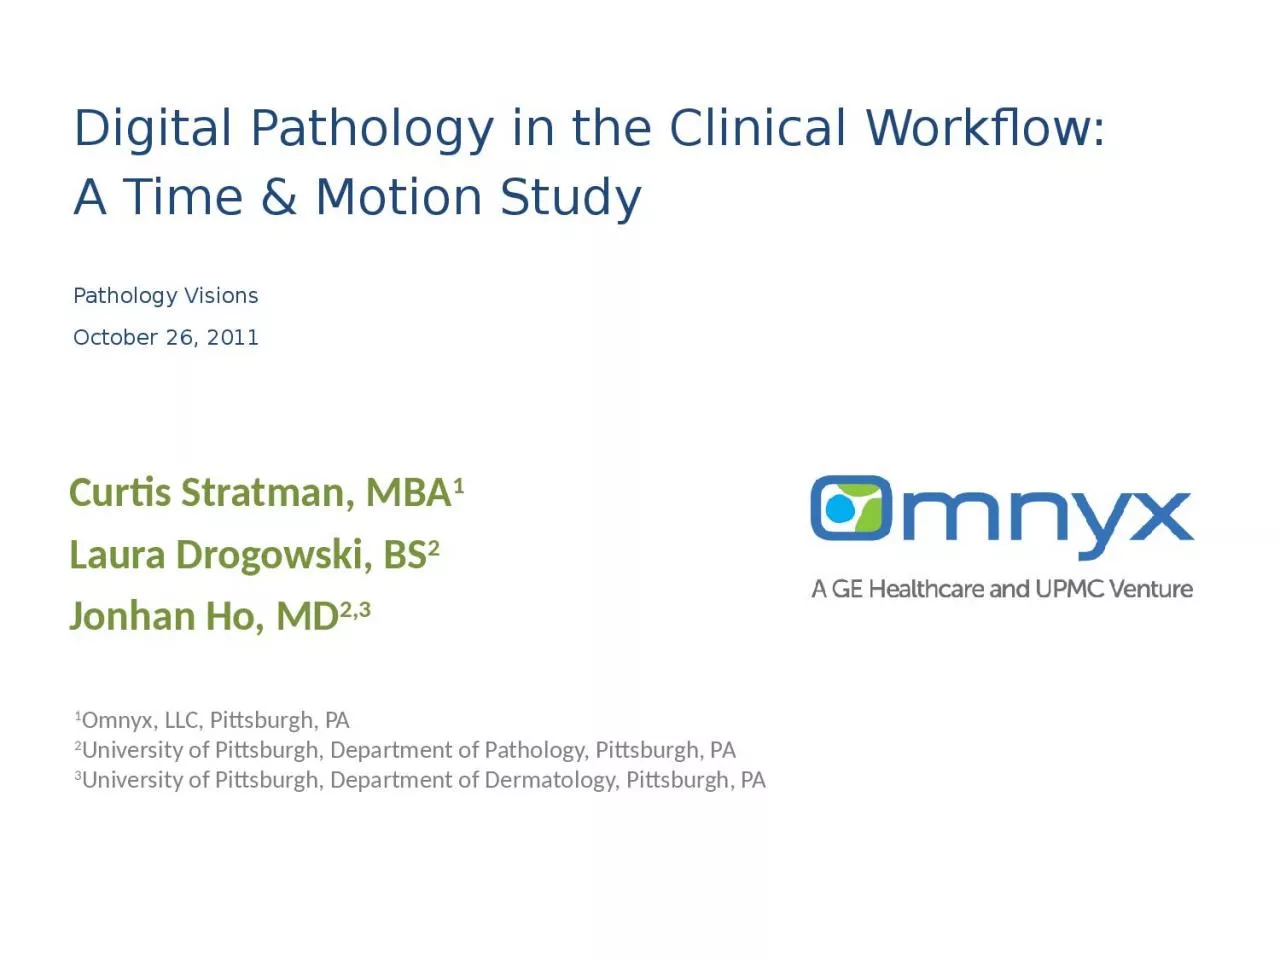 Digital Pathology in the Clinical Workflow: